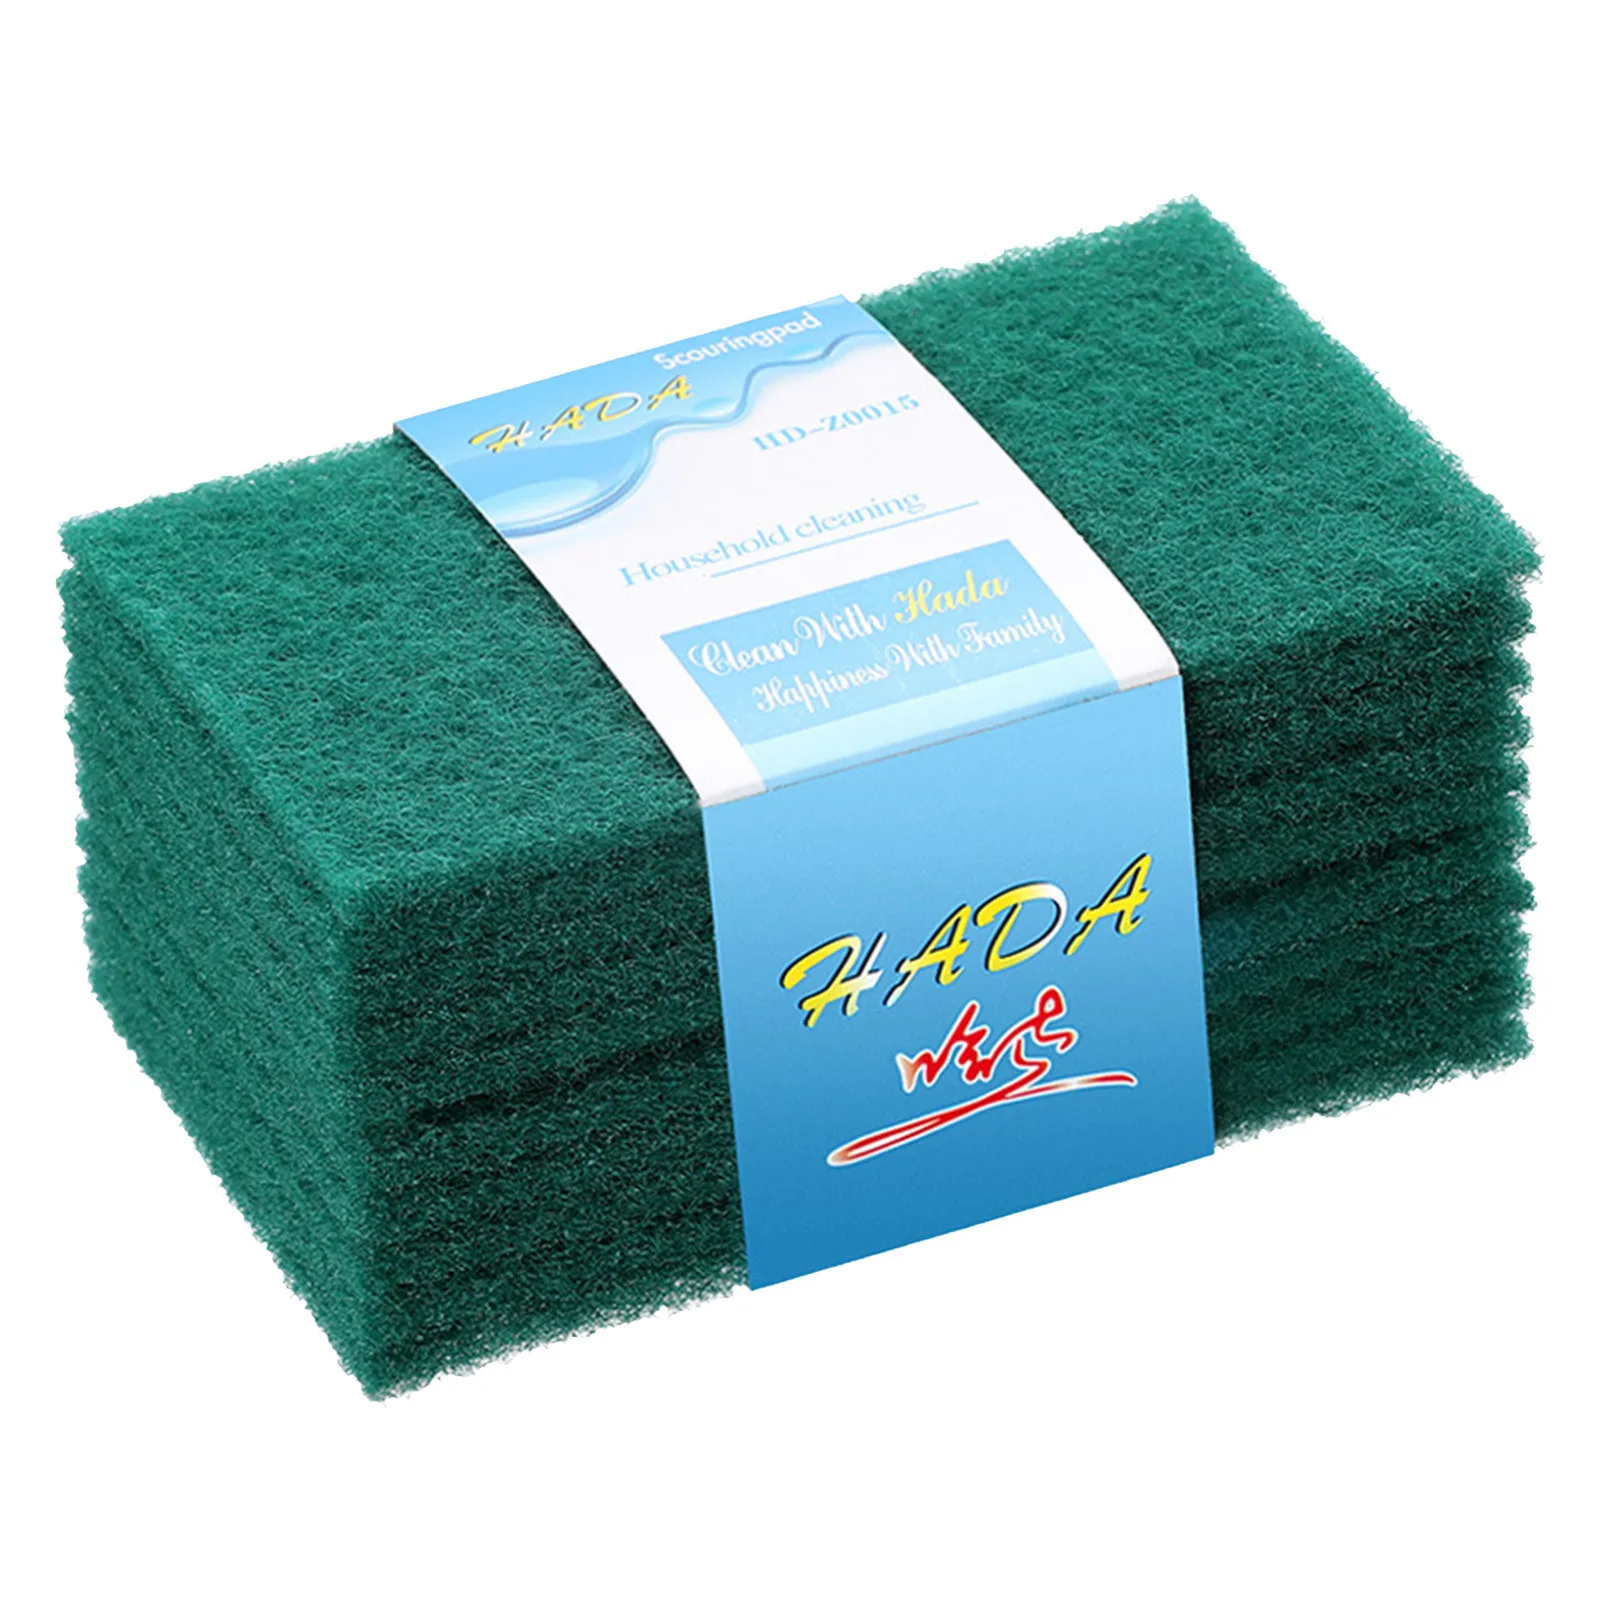 https://ae01.alicdn.com/kf/Sc250e1533f30480488adce3c4bc18a21H/Scouring-Pad-Dish-Scrubber-Scouring-Pads-Green-Reusable-Household-Scrub-Pads-The-Pink-Stuff-Cleaning-Kit.jpg